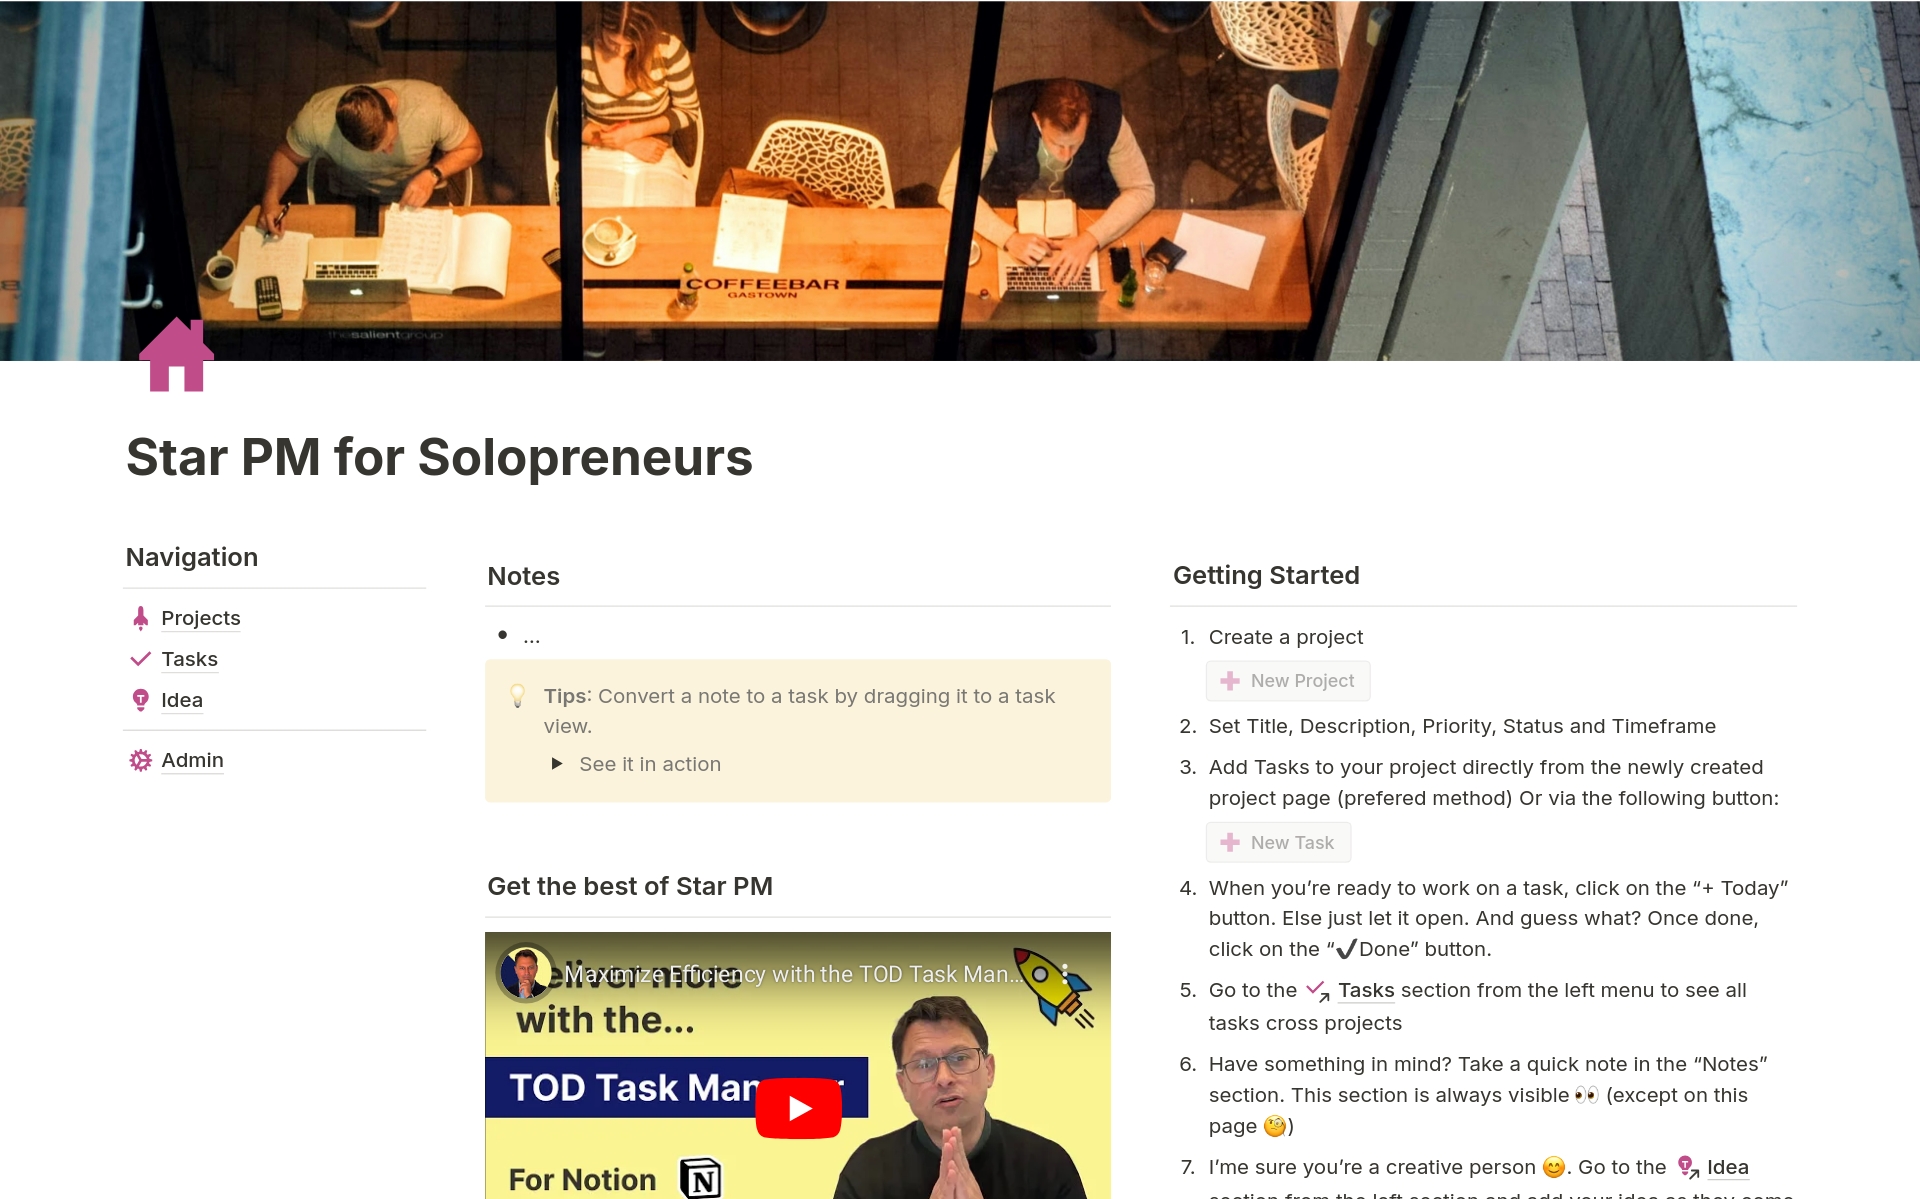 Project and task management for solopreneurs: from idea to going live, stay focused and start delivering value.